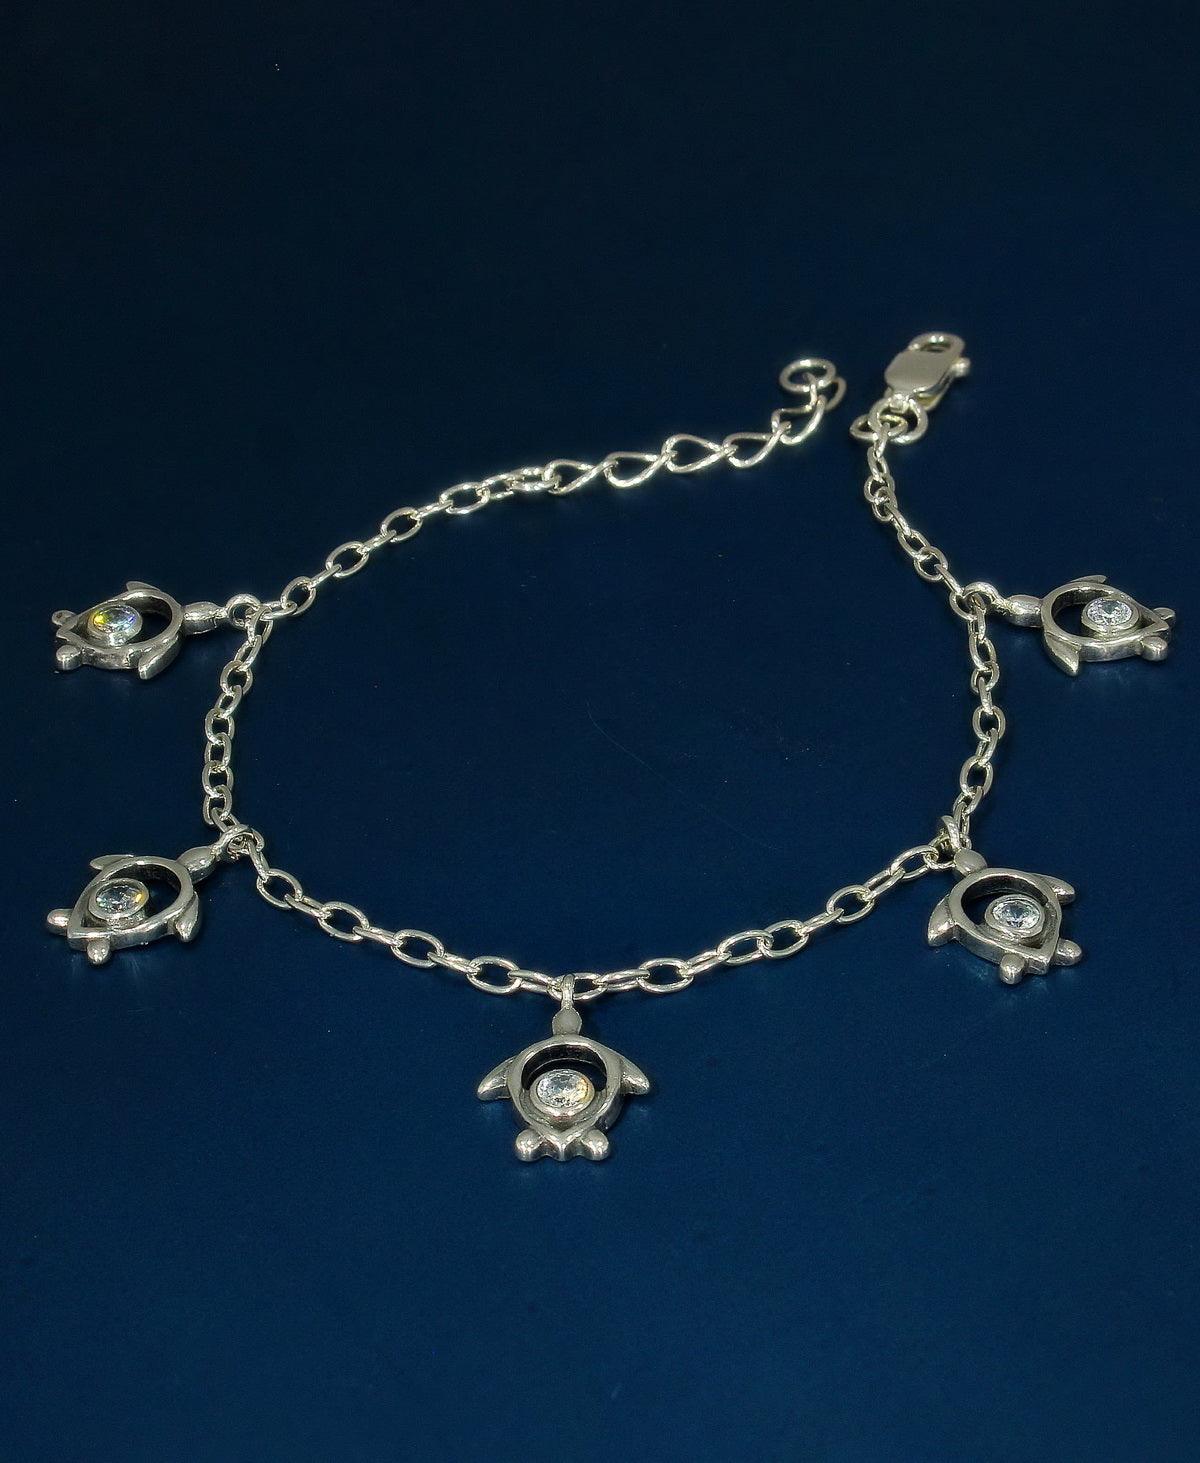 Turtle Charms Stone Studded Silver Bracelet - Chandrani Pearls